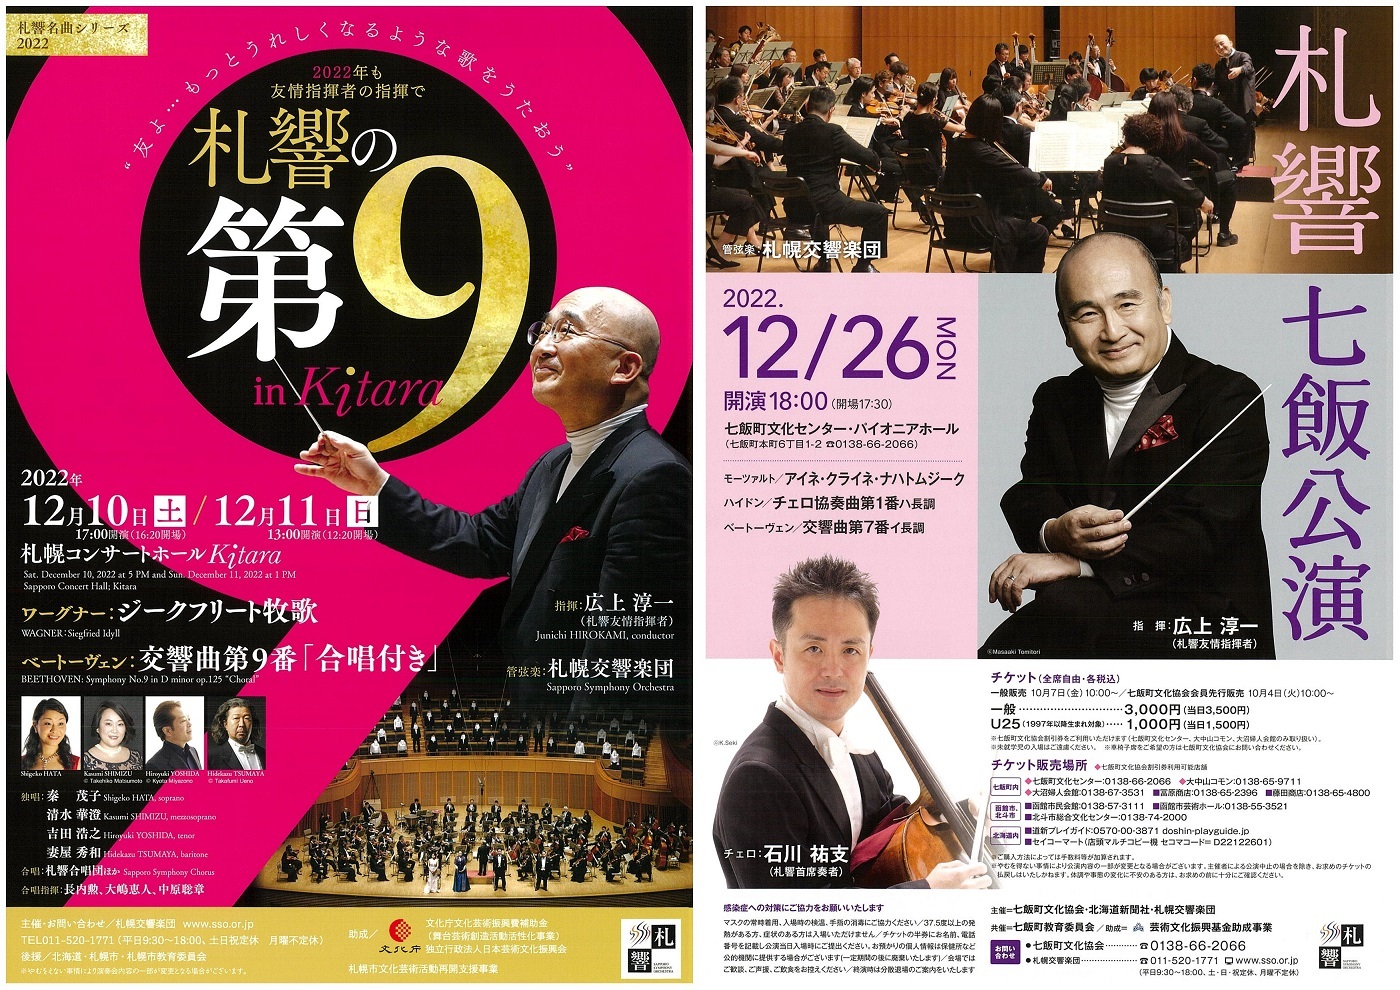 【Ticket Sales in October 2022】Sakkyo Sponsored Concerts – Subscription, hitaru, the Ninth and other cities in Hokkaido